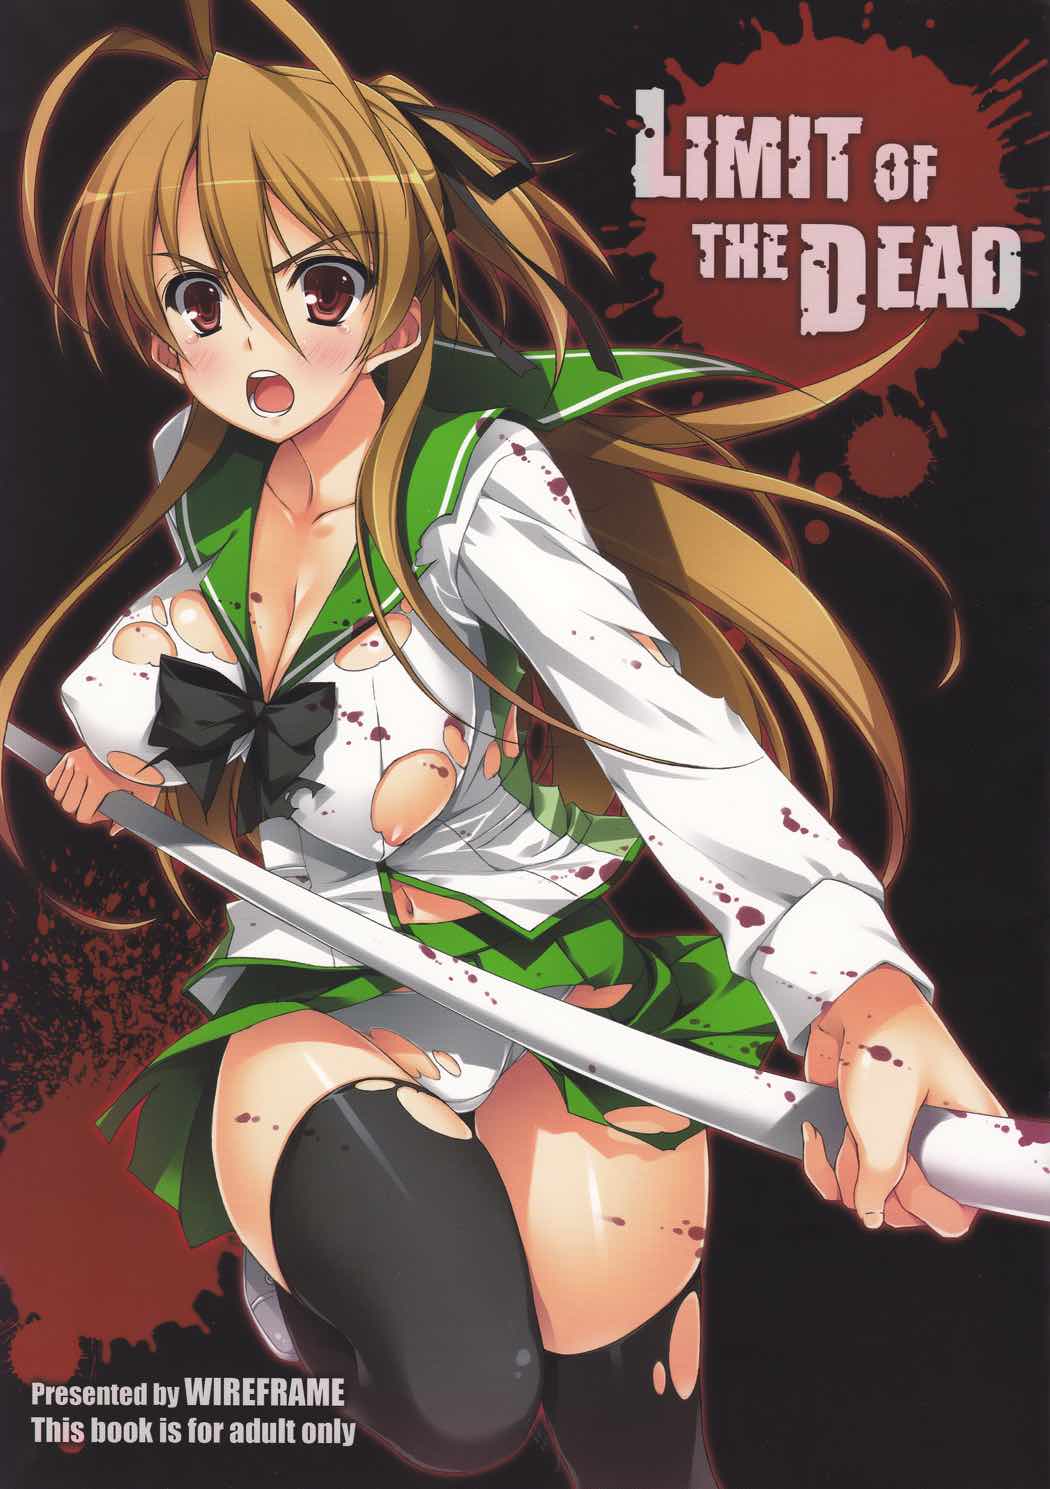 LIMIT OF THE DEAD 1ページ